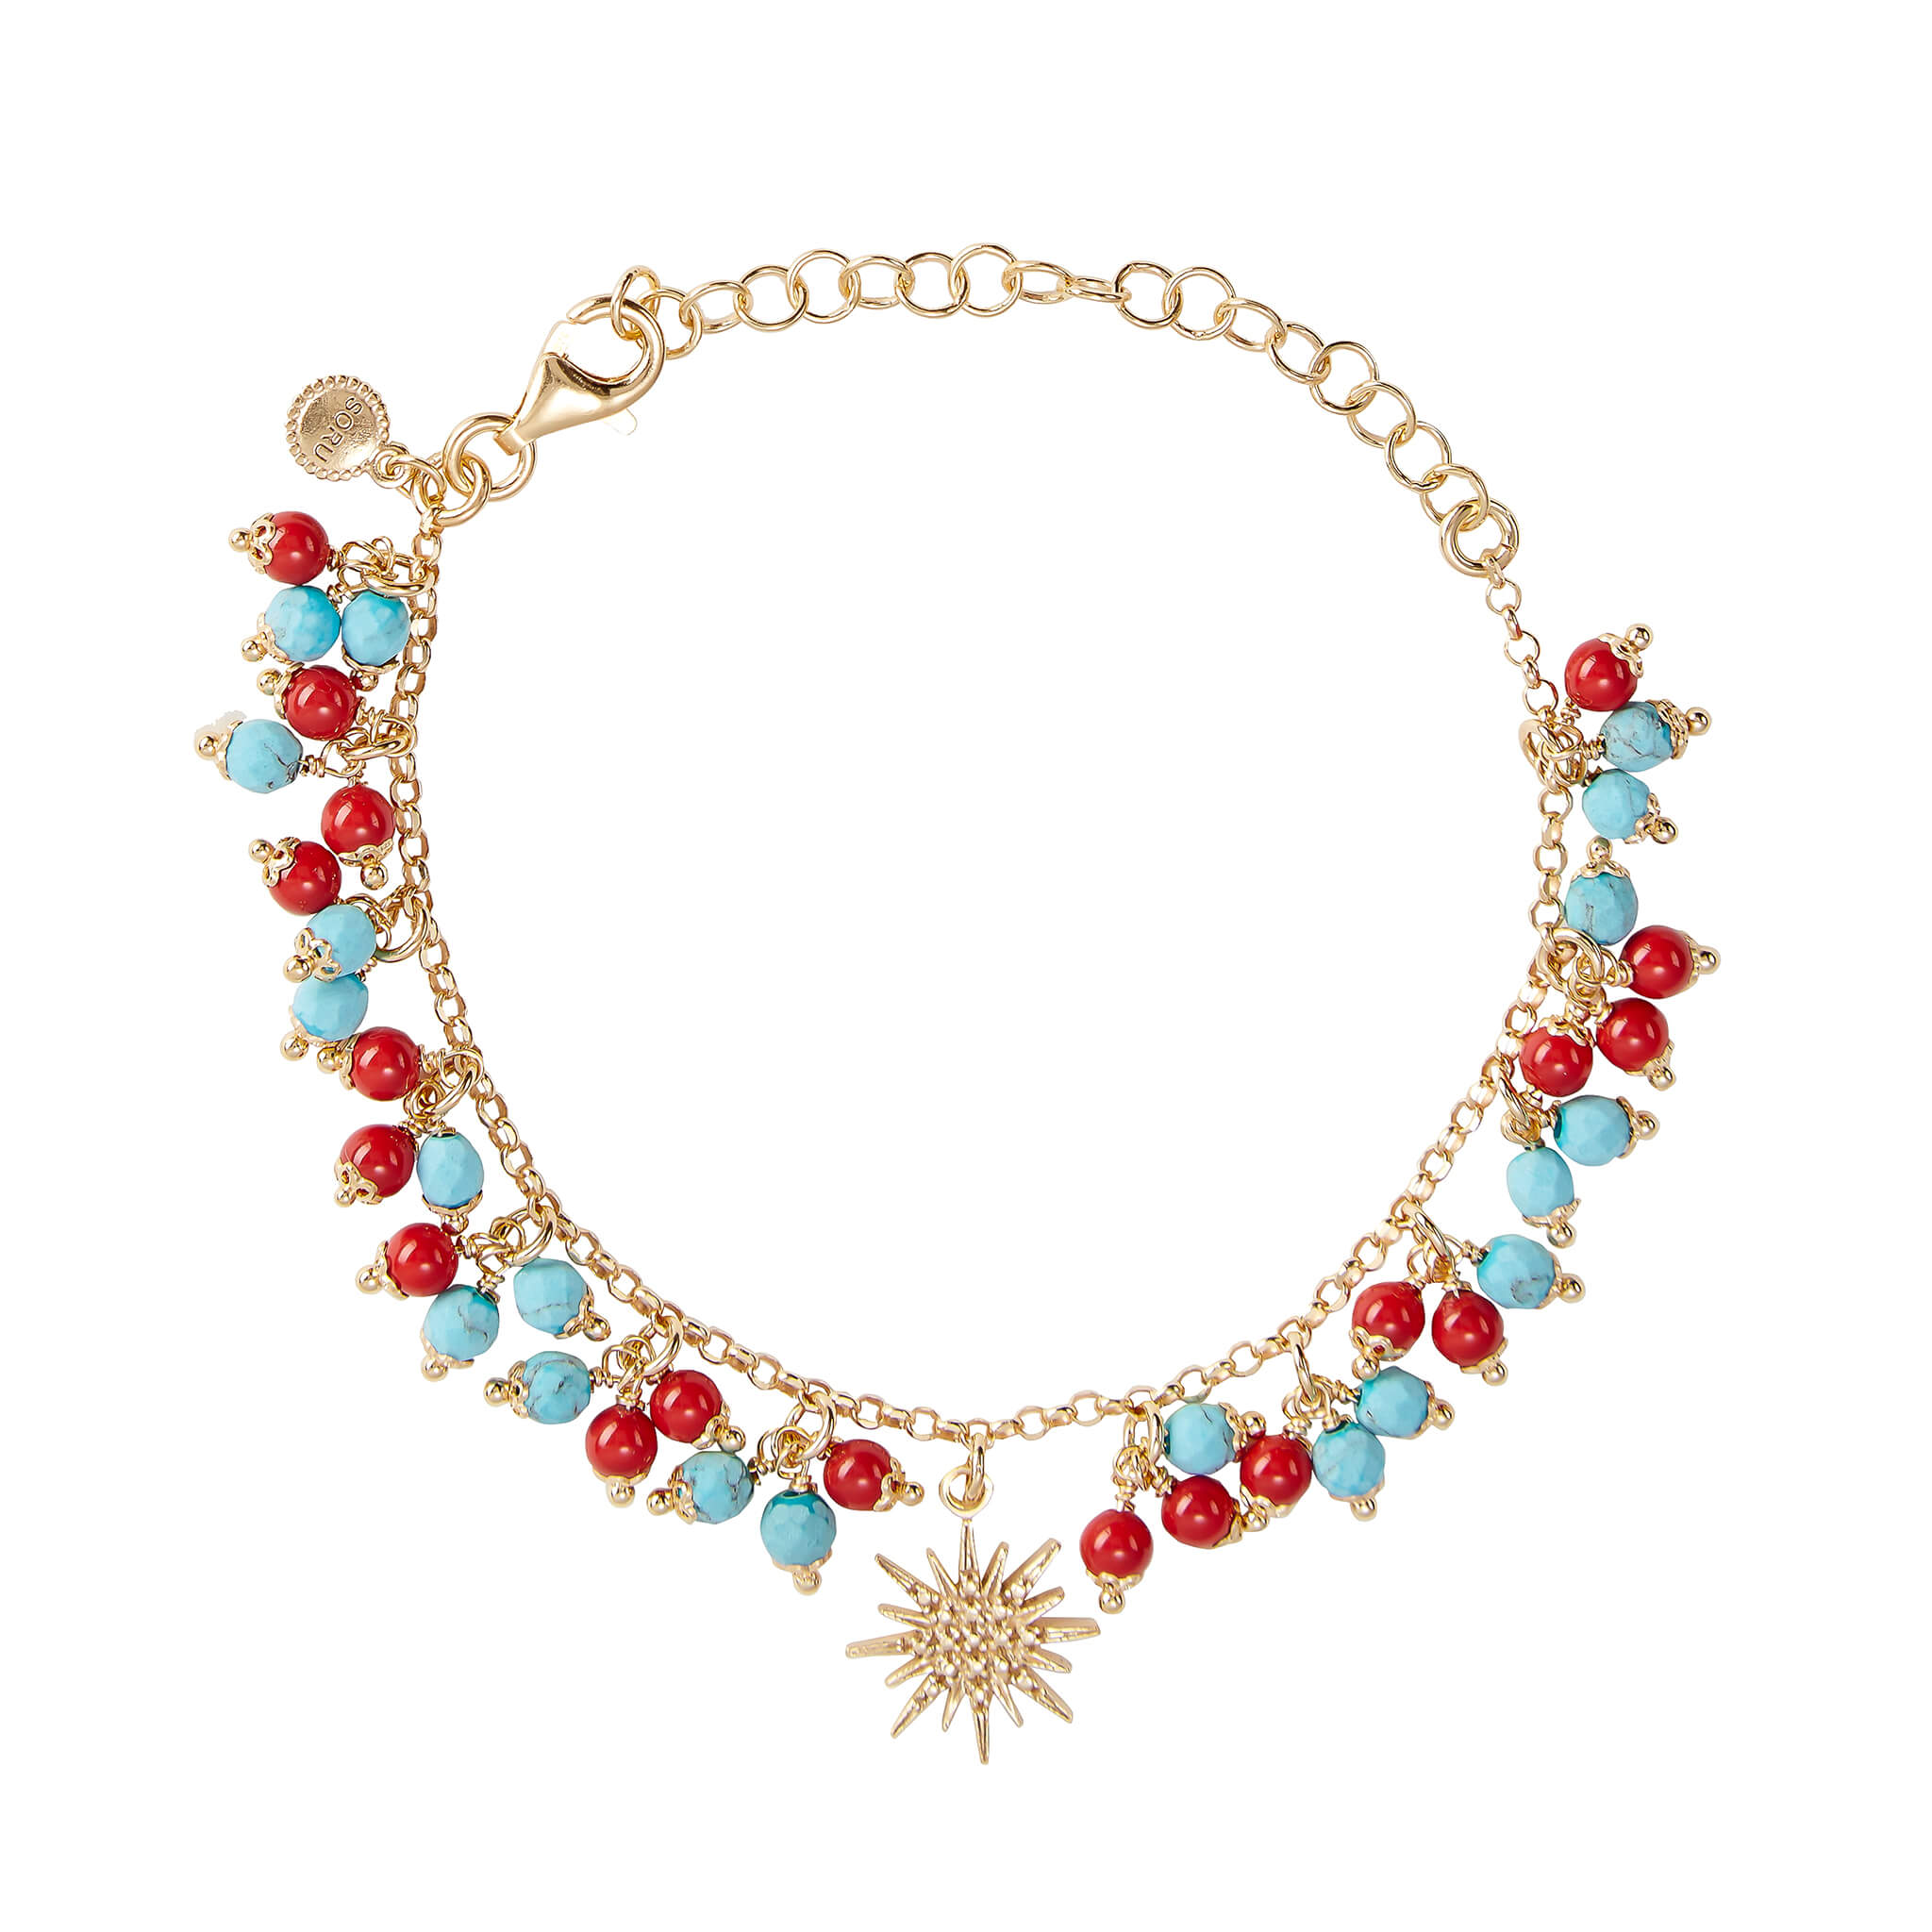 Coral and turquoise star bracelet